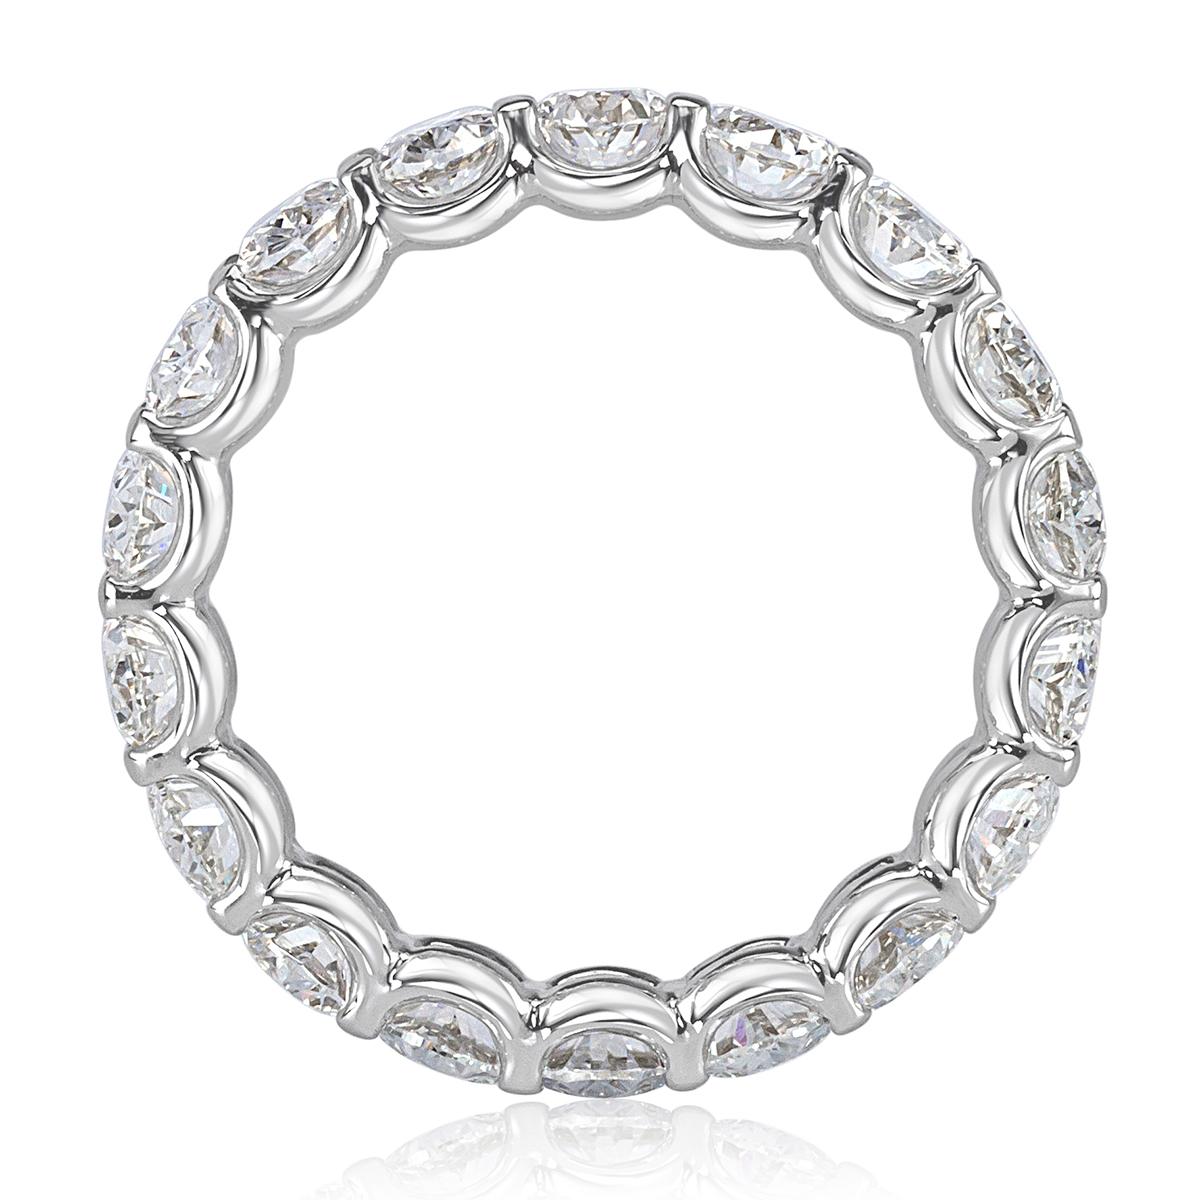 Handcrafted in 18k white gold, this gorgeous diamond eternity band features 4.60ct of perfectly matched oval cut diamonds graded at E-F, VS1-VS2. Each diamond is hand selected and beautifully showcased in a shared 